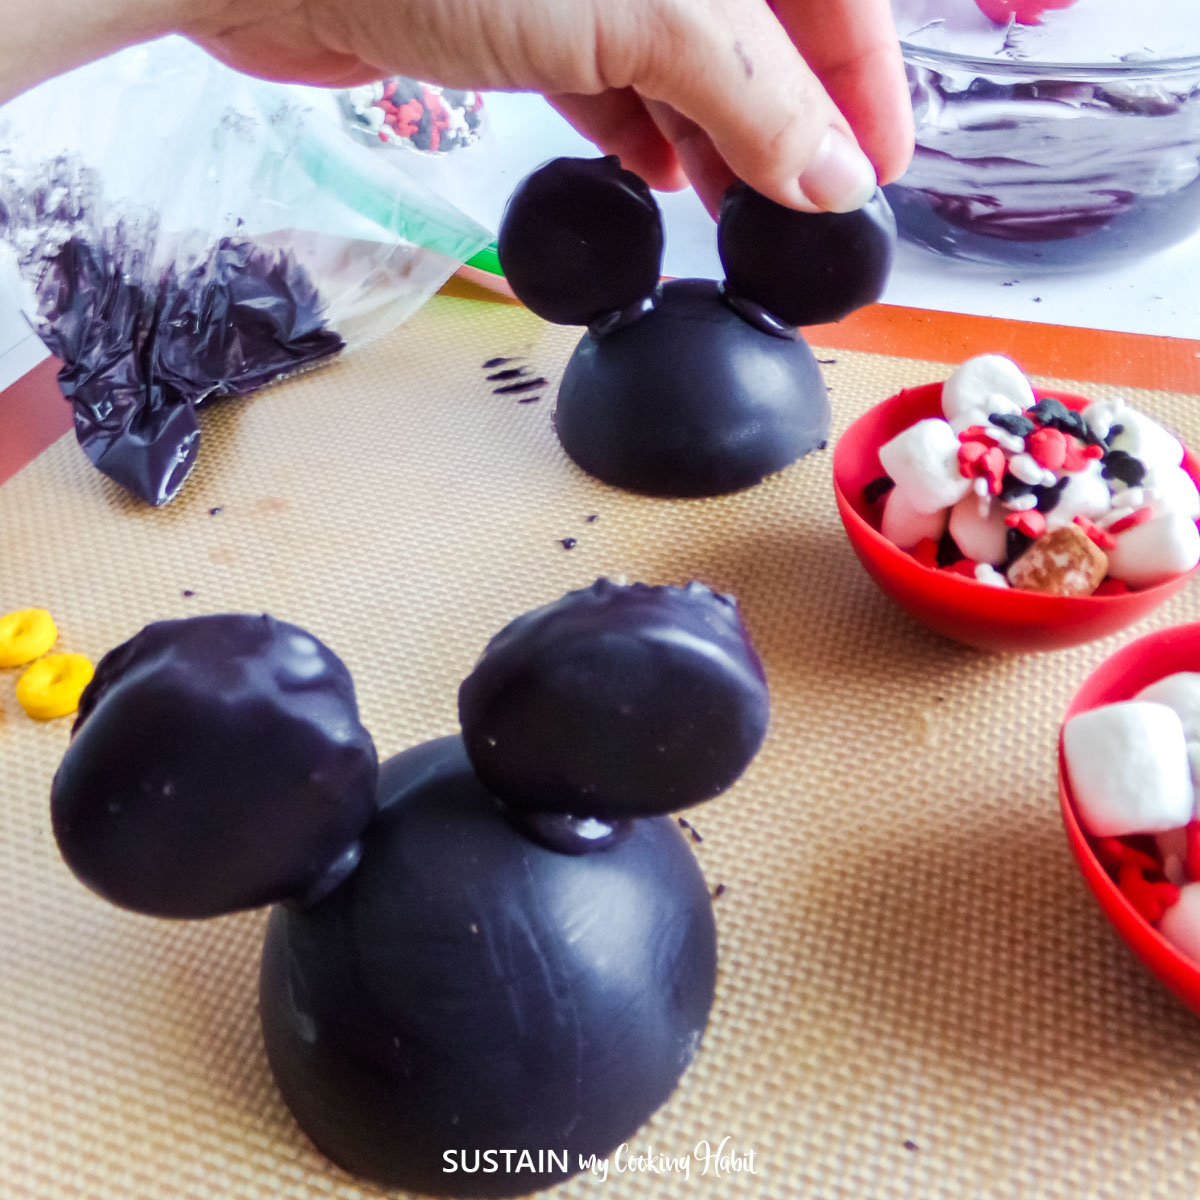 Attaching peppermint patties to the black cups to form ears.